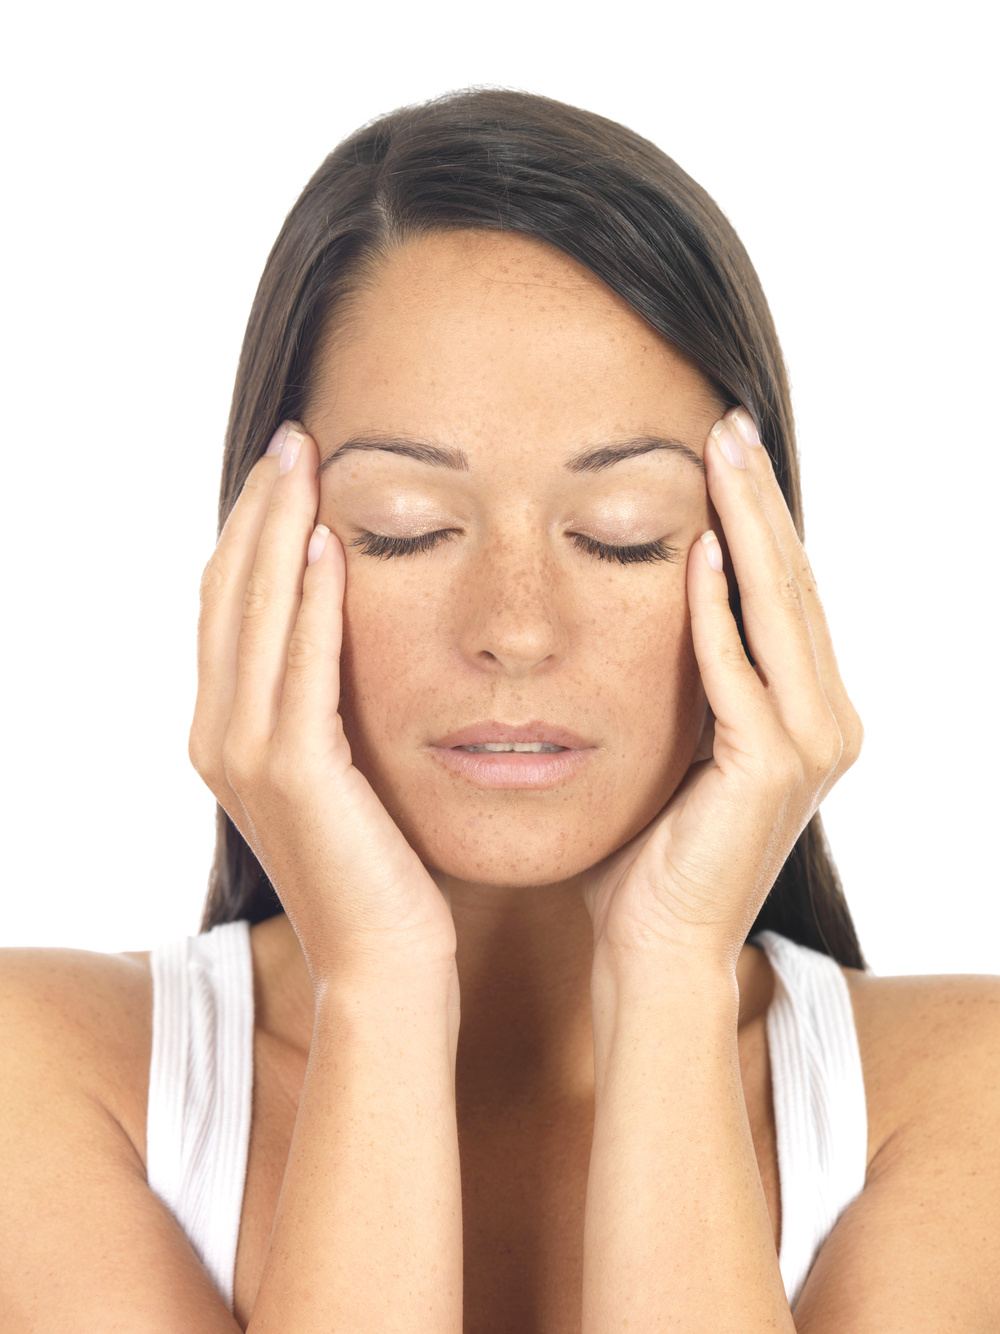 There can be help for headache sufferers in the form of physiotherapy.